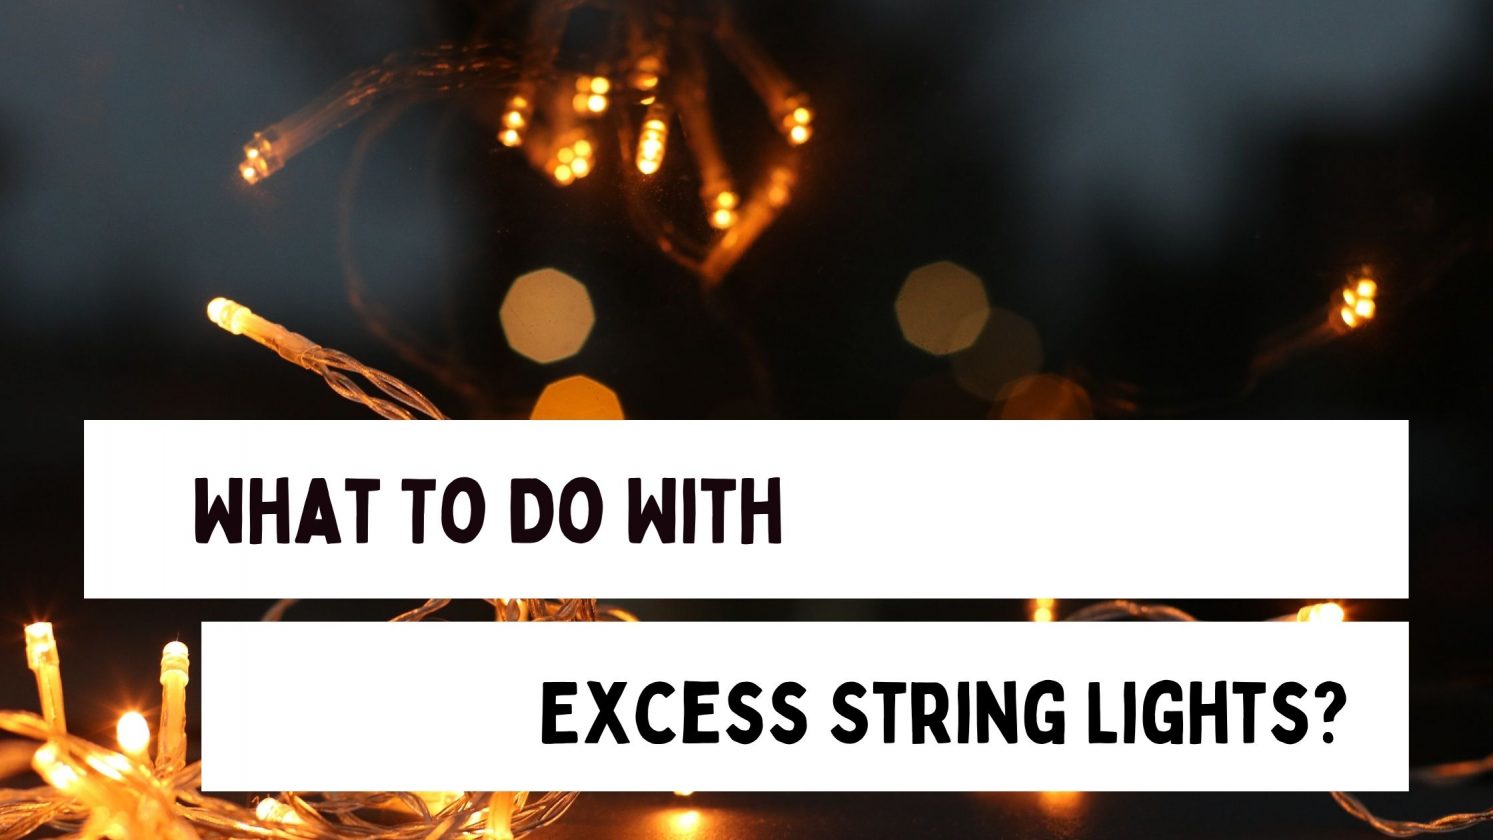 What To Do With Excess String Lights?